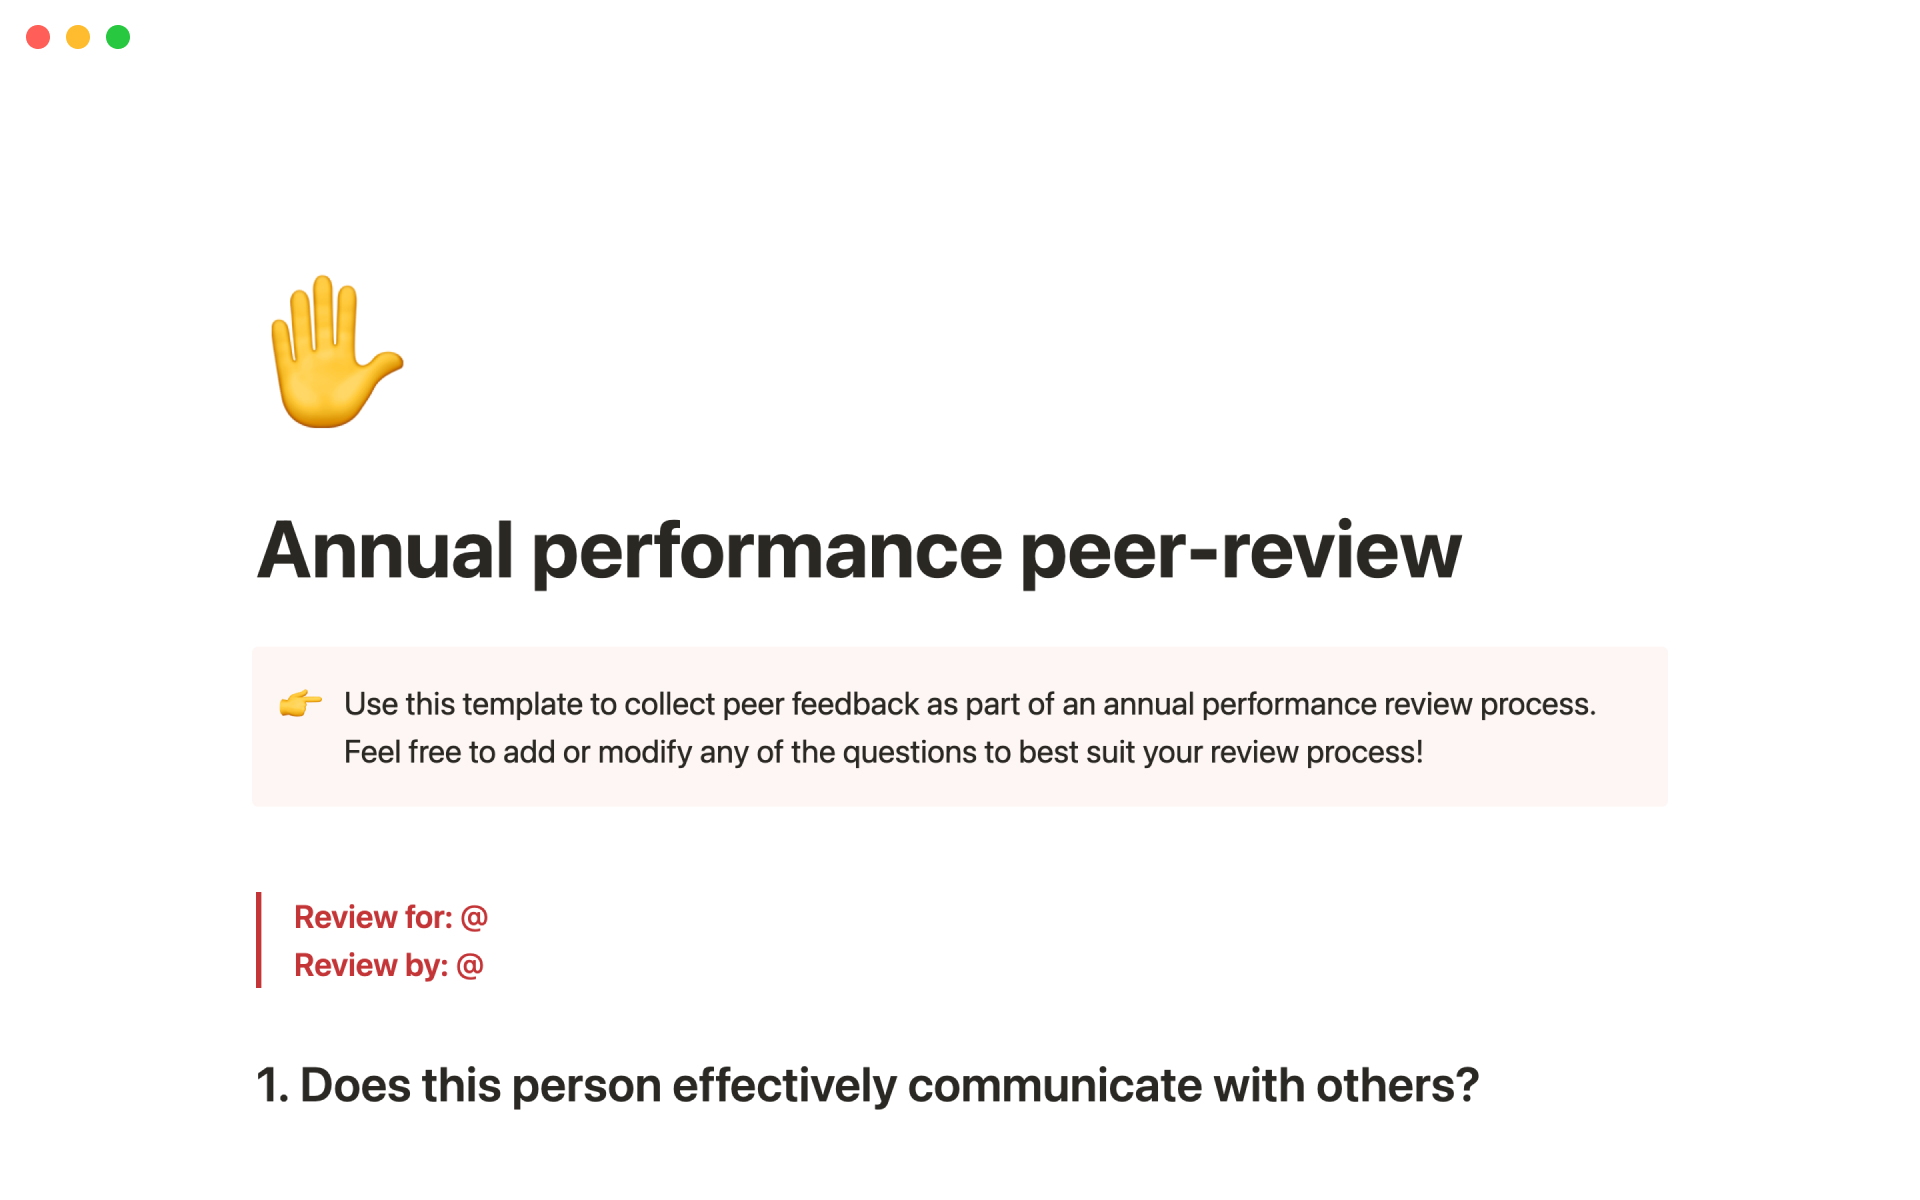 Collect peer feedback as part of your annual performance review process.